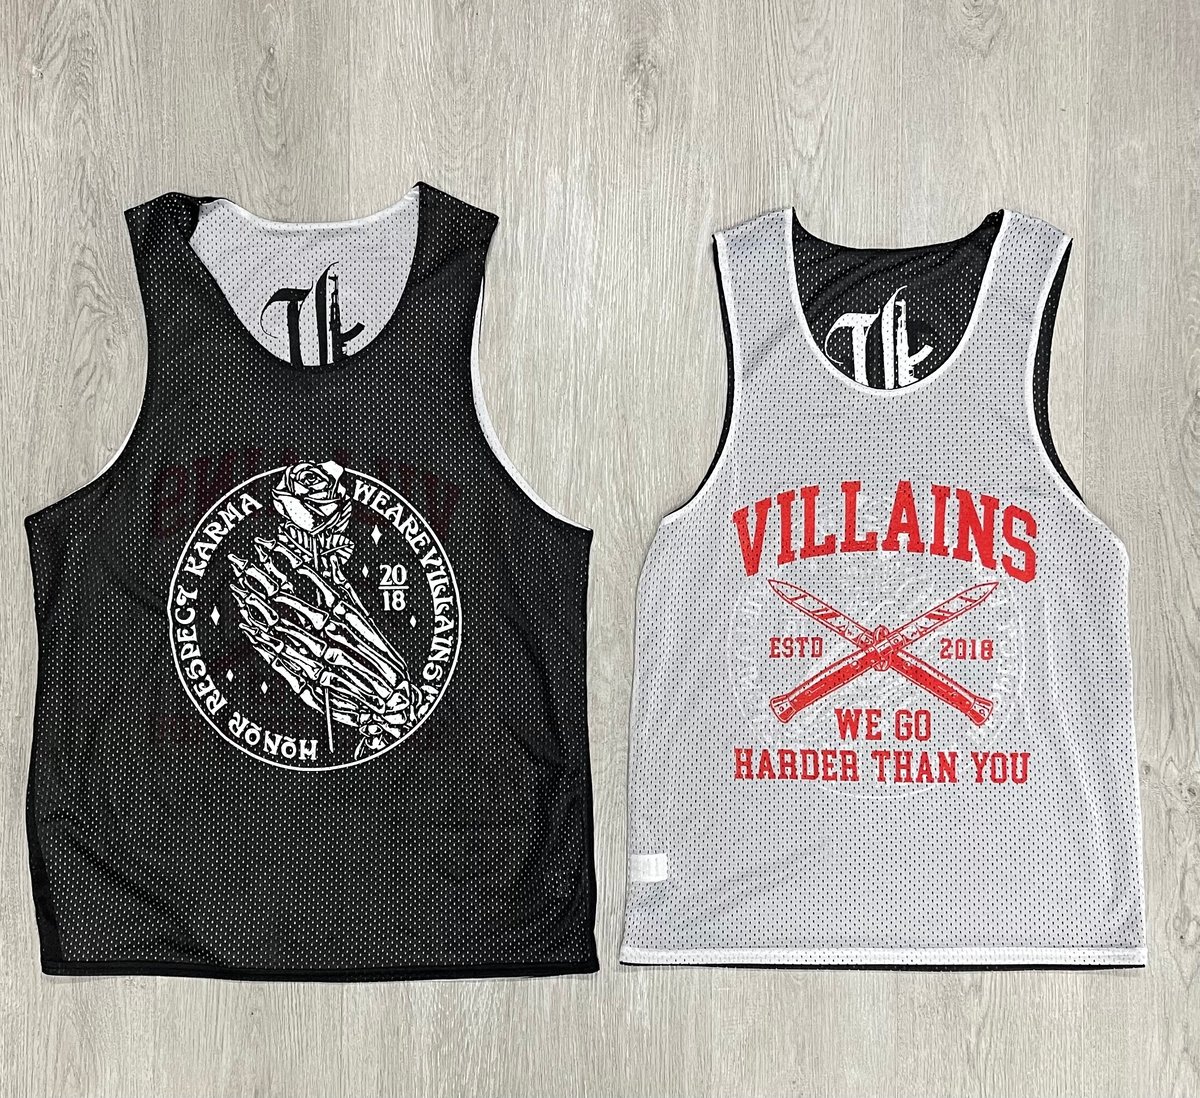 CAGERS SV on Black Reversible Mesh Tank – AMR Ventura County